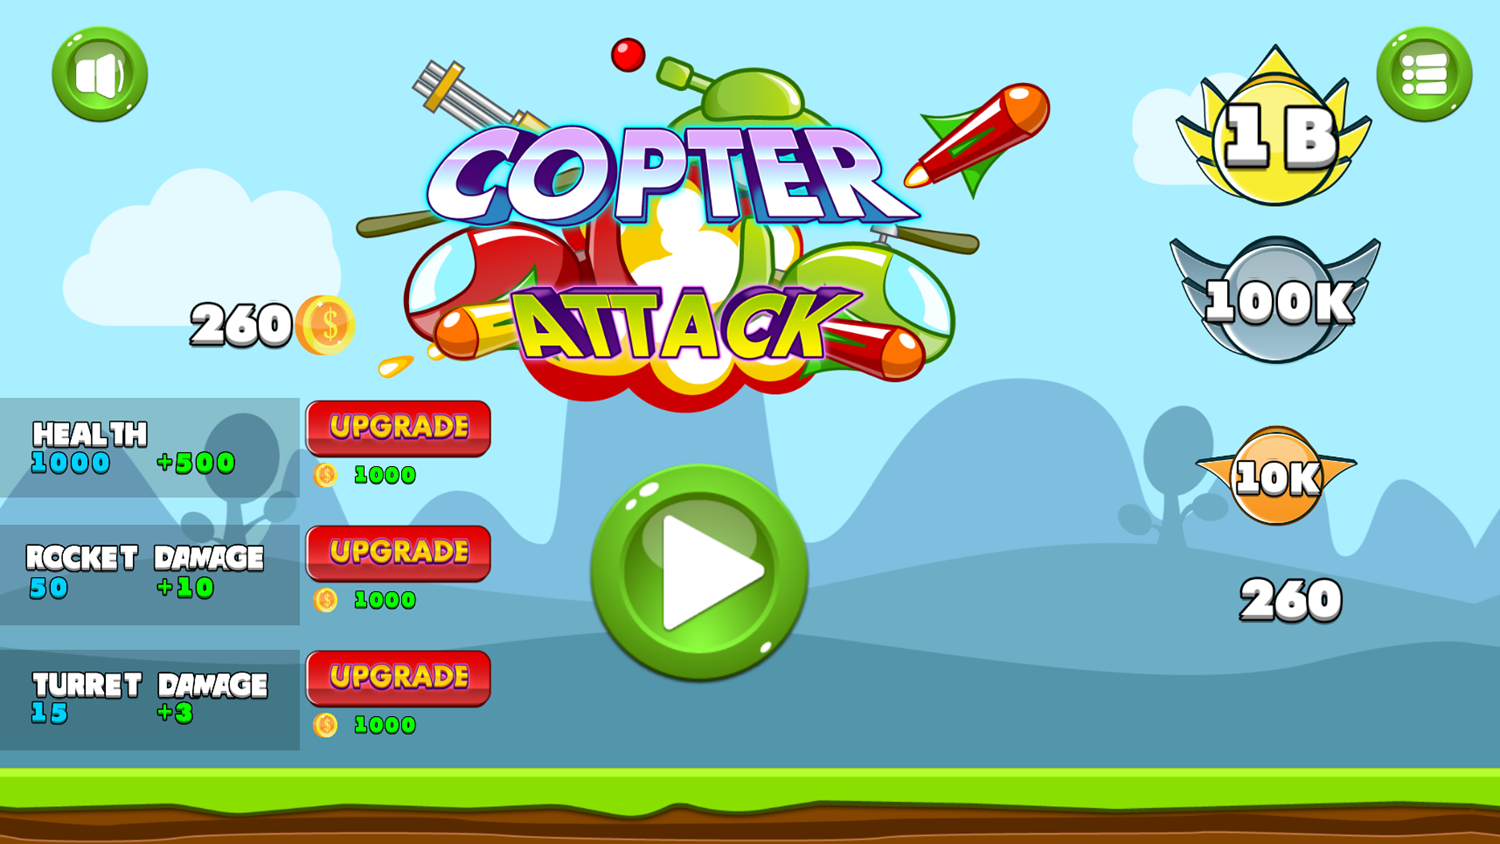 Copter Attack Game Over Screenshot.